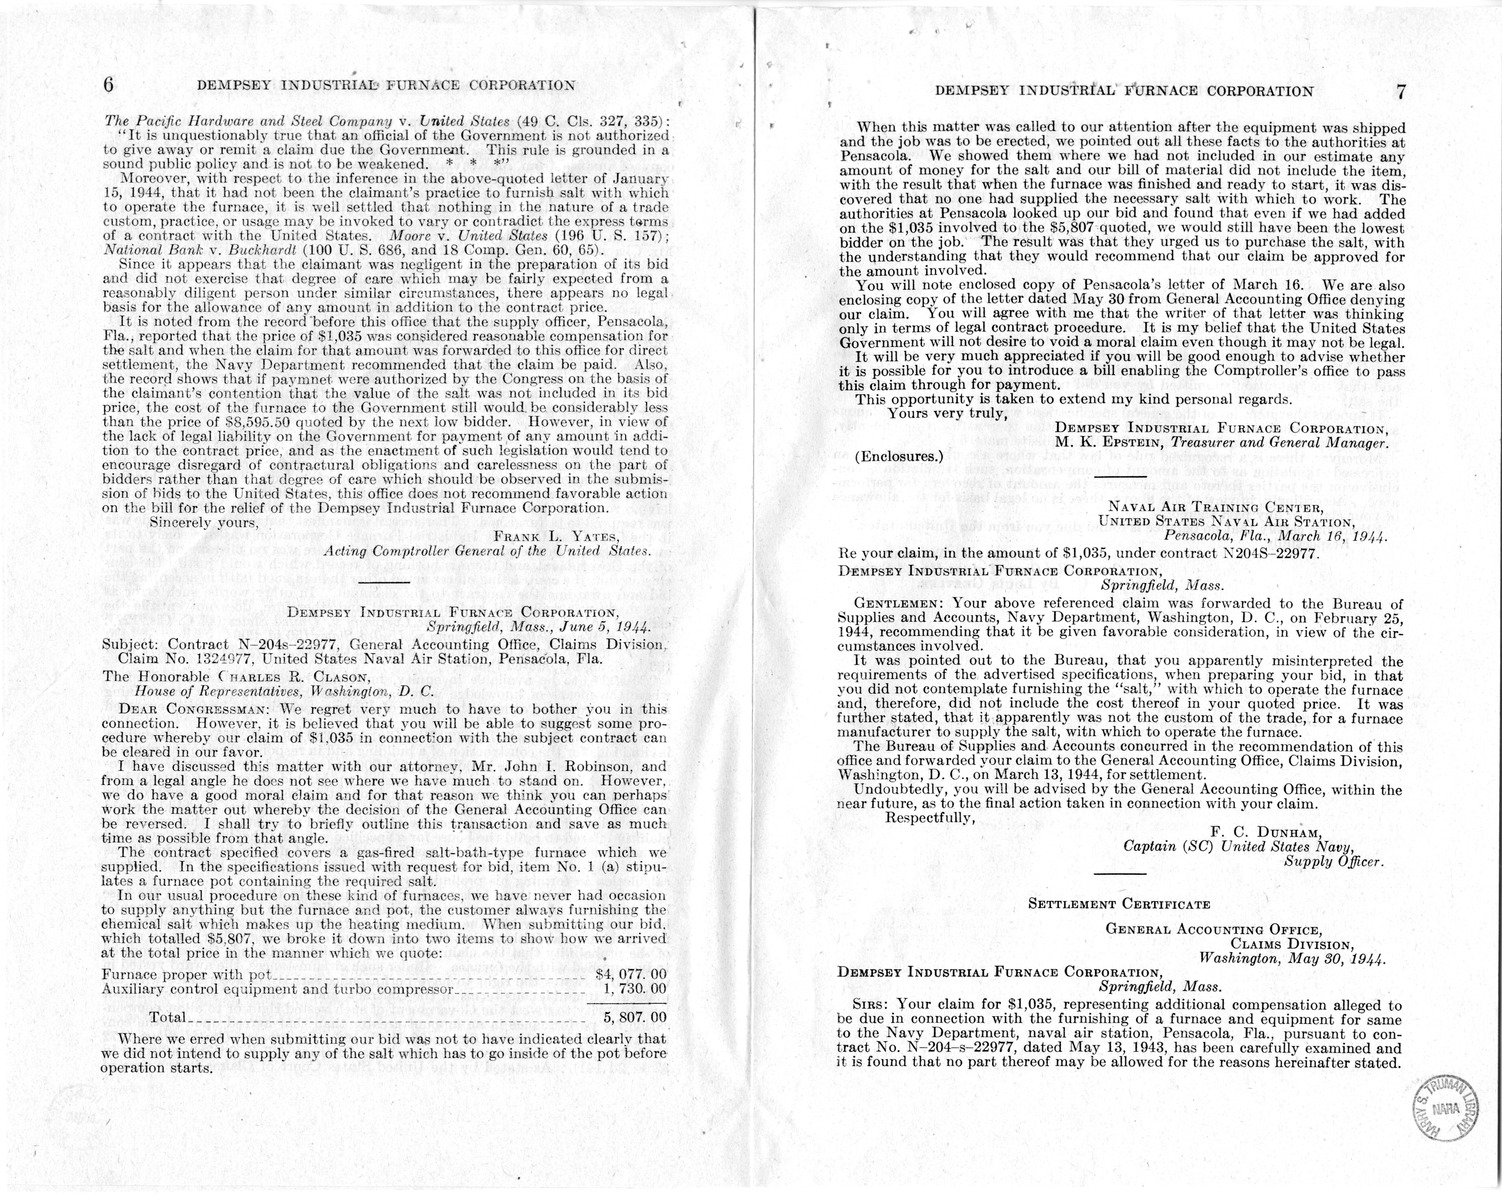 Memorandum from Frederick J. Bailey to M. C. Latta, H.R. 201, For the Relief of the Dempsey Industrial Furnace Corporation, with Attachments